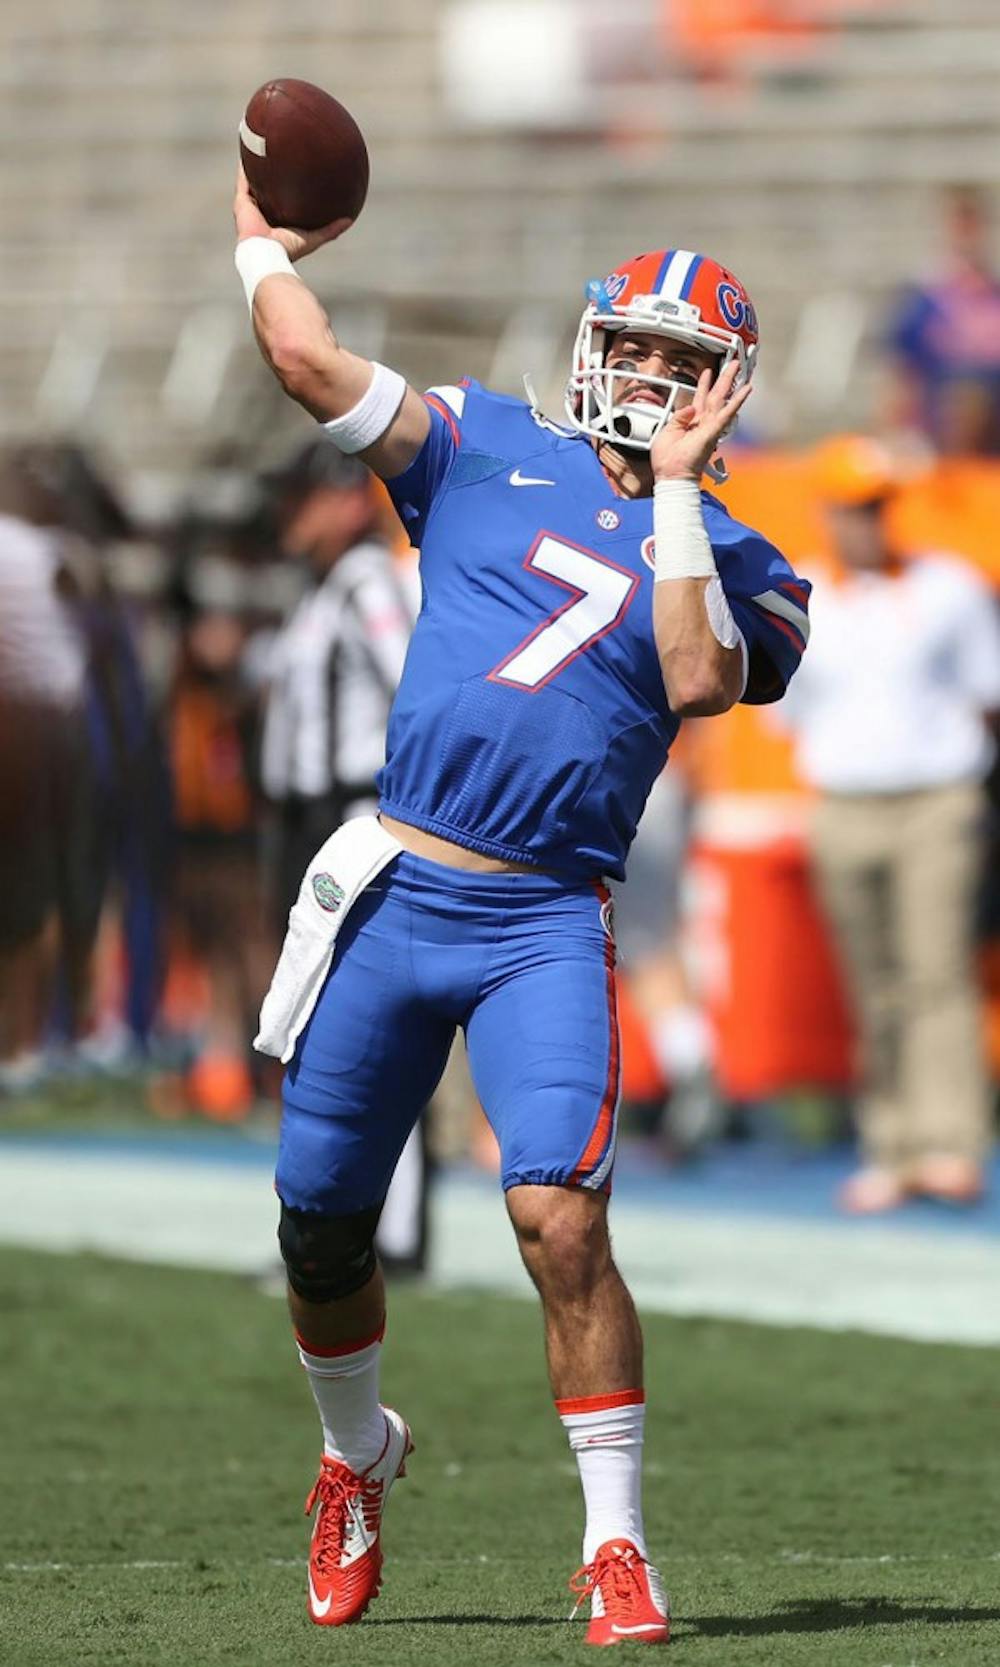 Florida quarterback Will Grier warms up before the start of play against Tennessee at Ben Hill Griffin Stadium in Gainesville, Fla., on Saturday, Sept. 26, 2015. (Stephen M. Dowell/Orlando Sentinel/TNS)